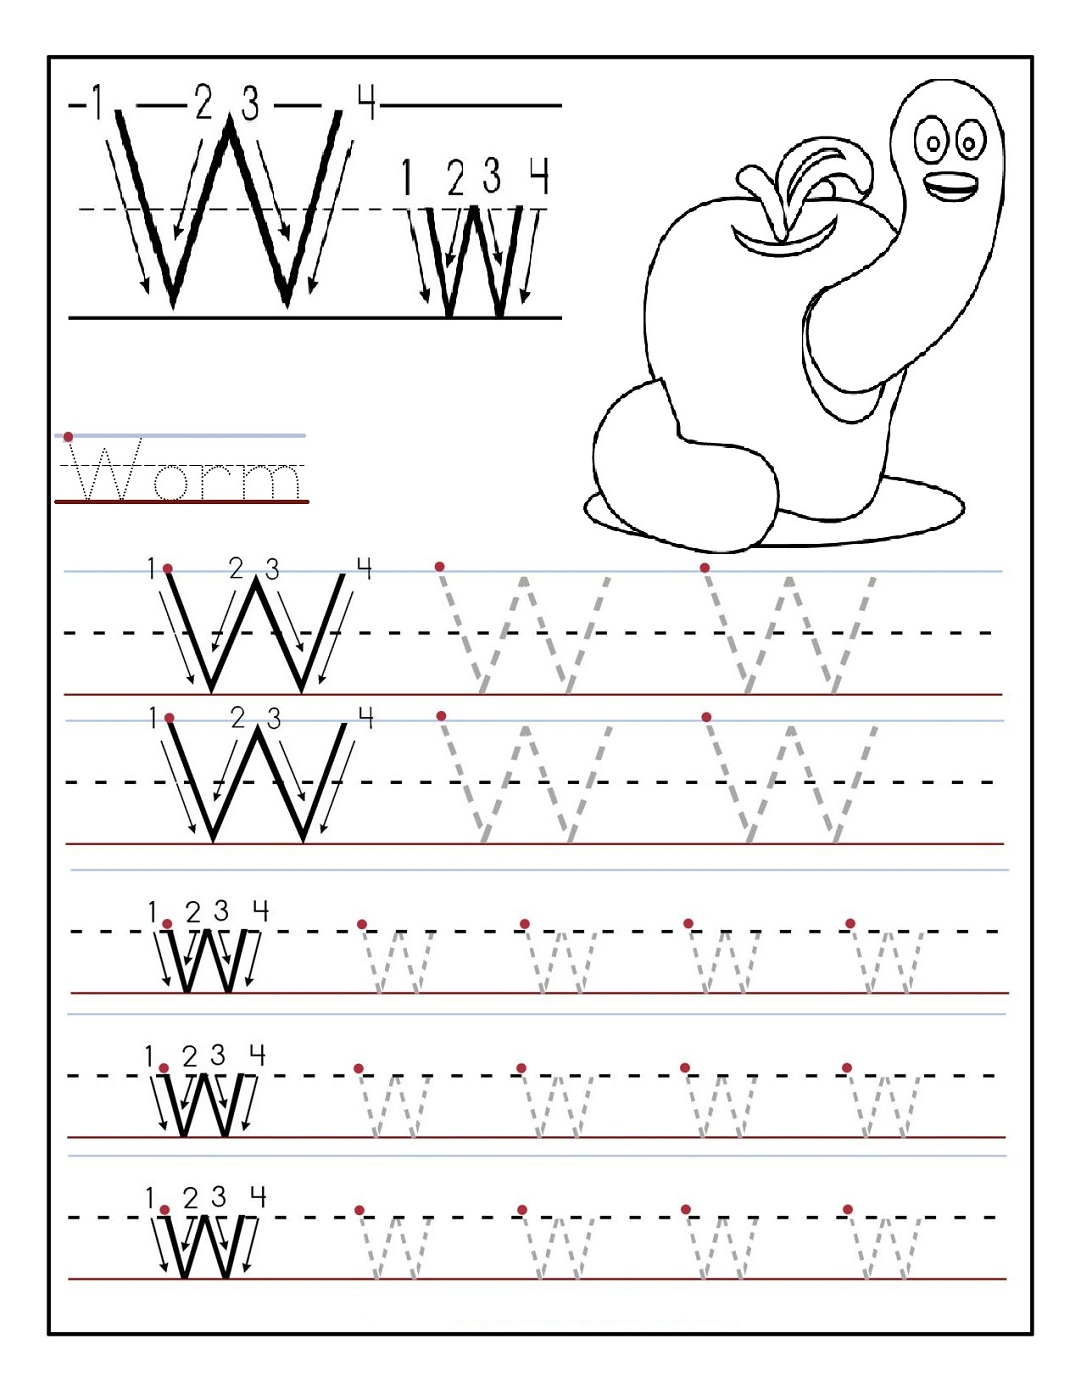 printable-missing-letter-worksheets-printable-word-searches